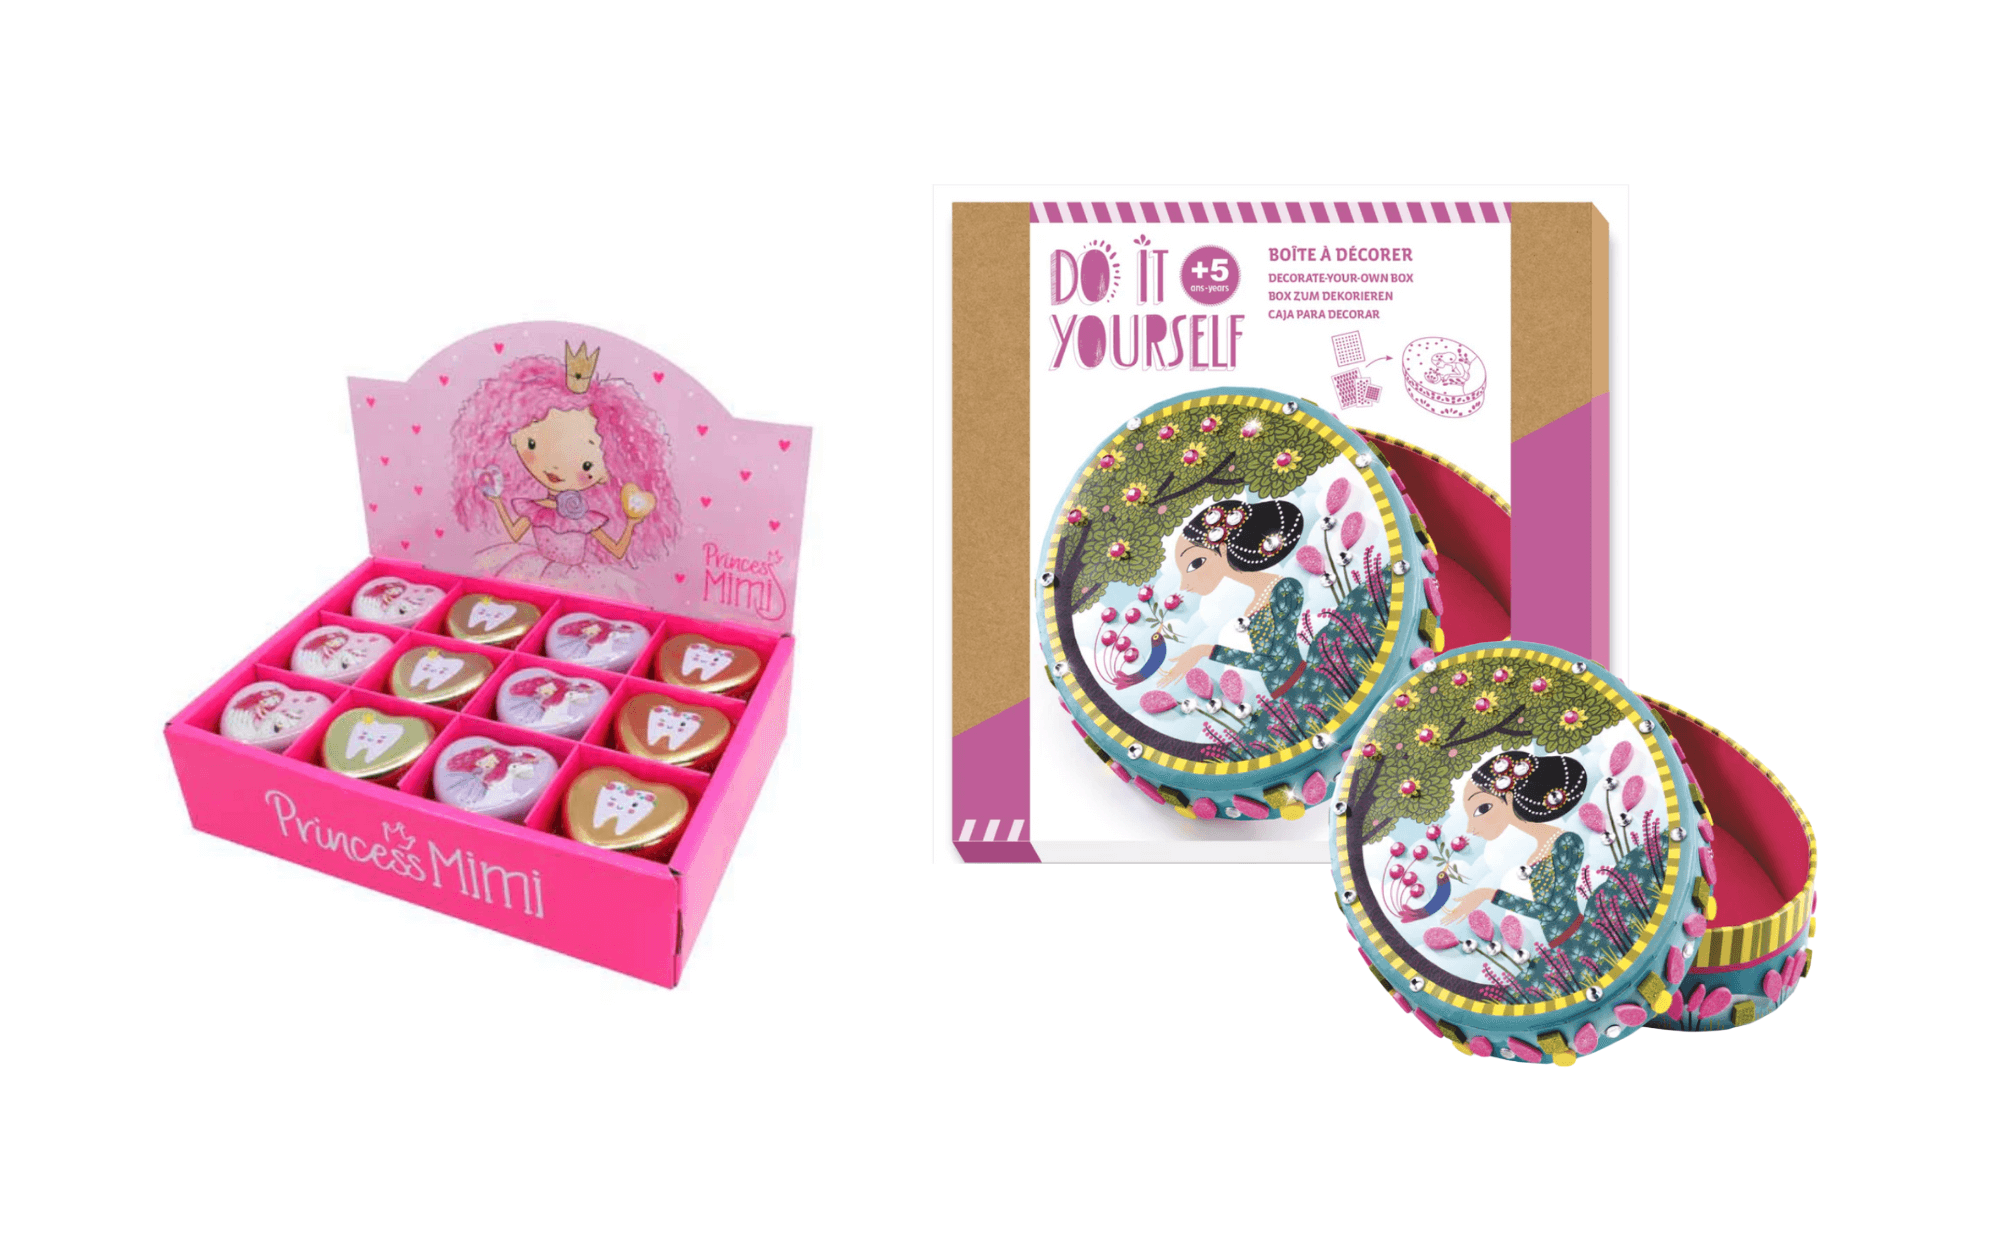 tooth fairy tin and DIY kit from Toyworld, My Toy Kingdom, Australia online store.